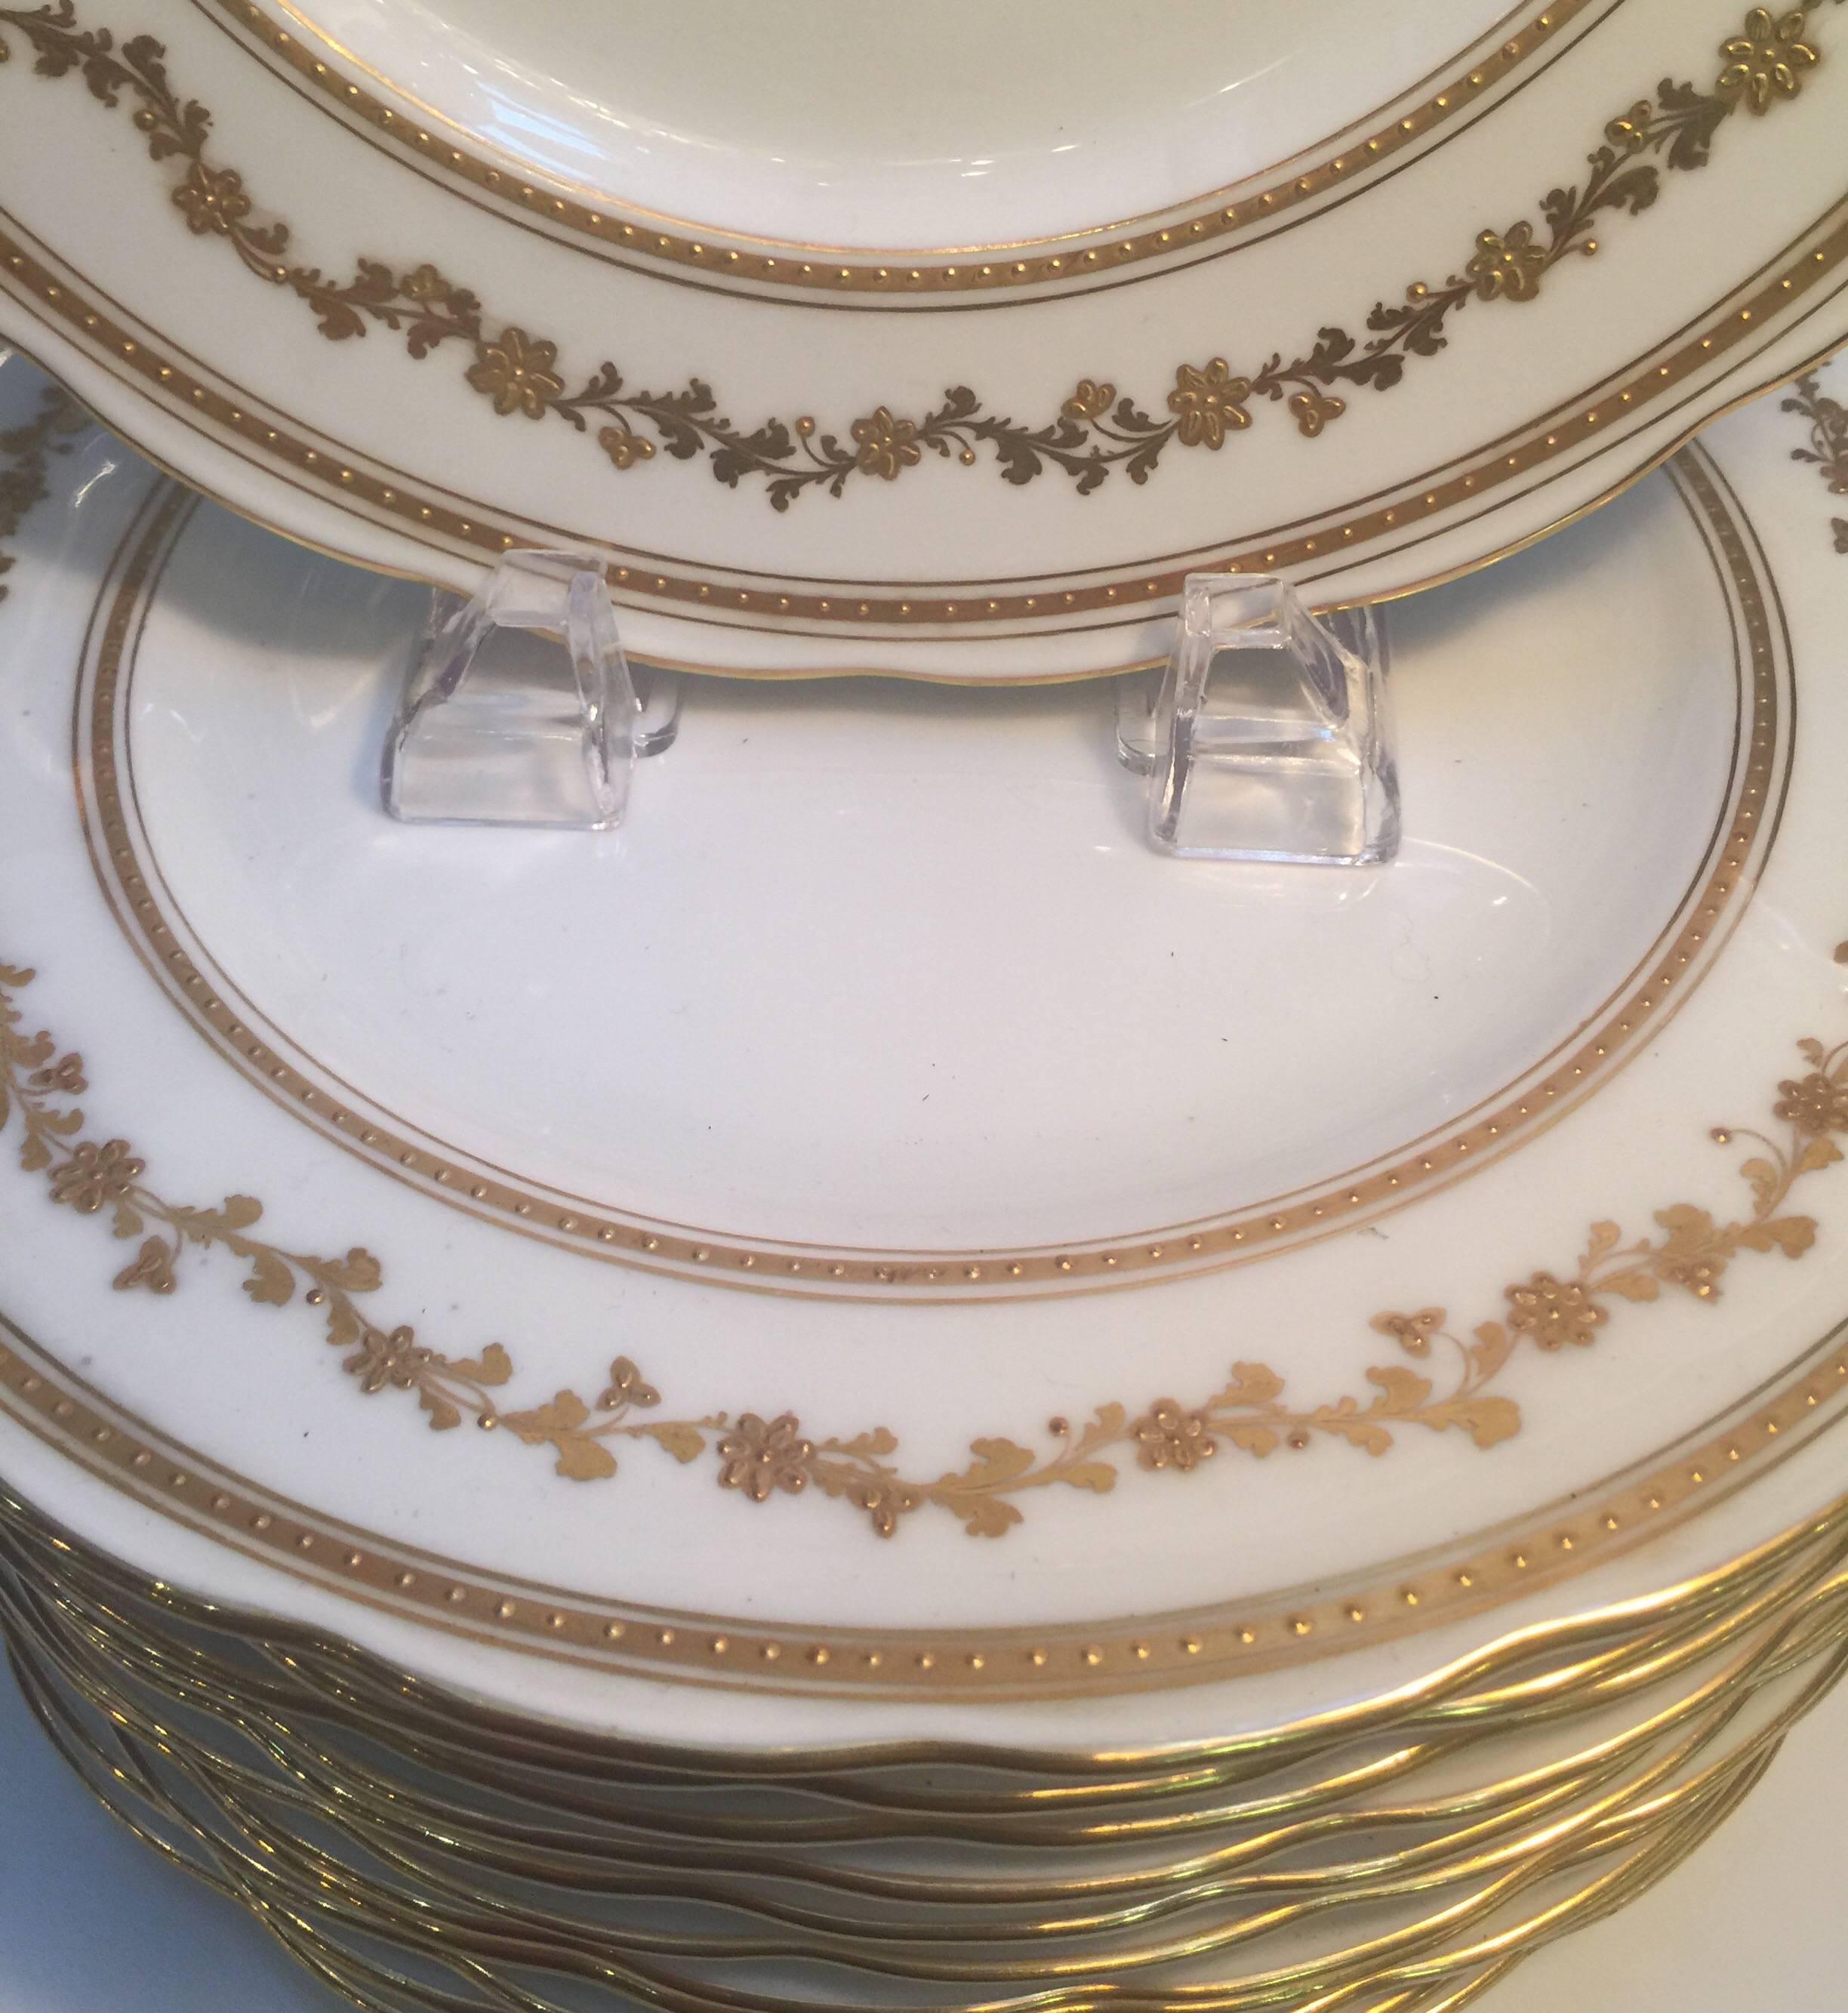 Elegant set of 12 raised gilt border dinner service plates with layered gold bands and floral band. The bone white background with scalloped edge.